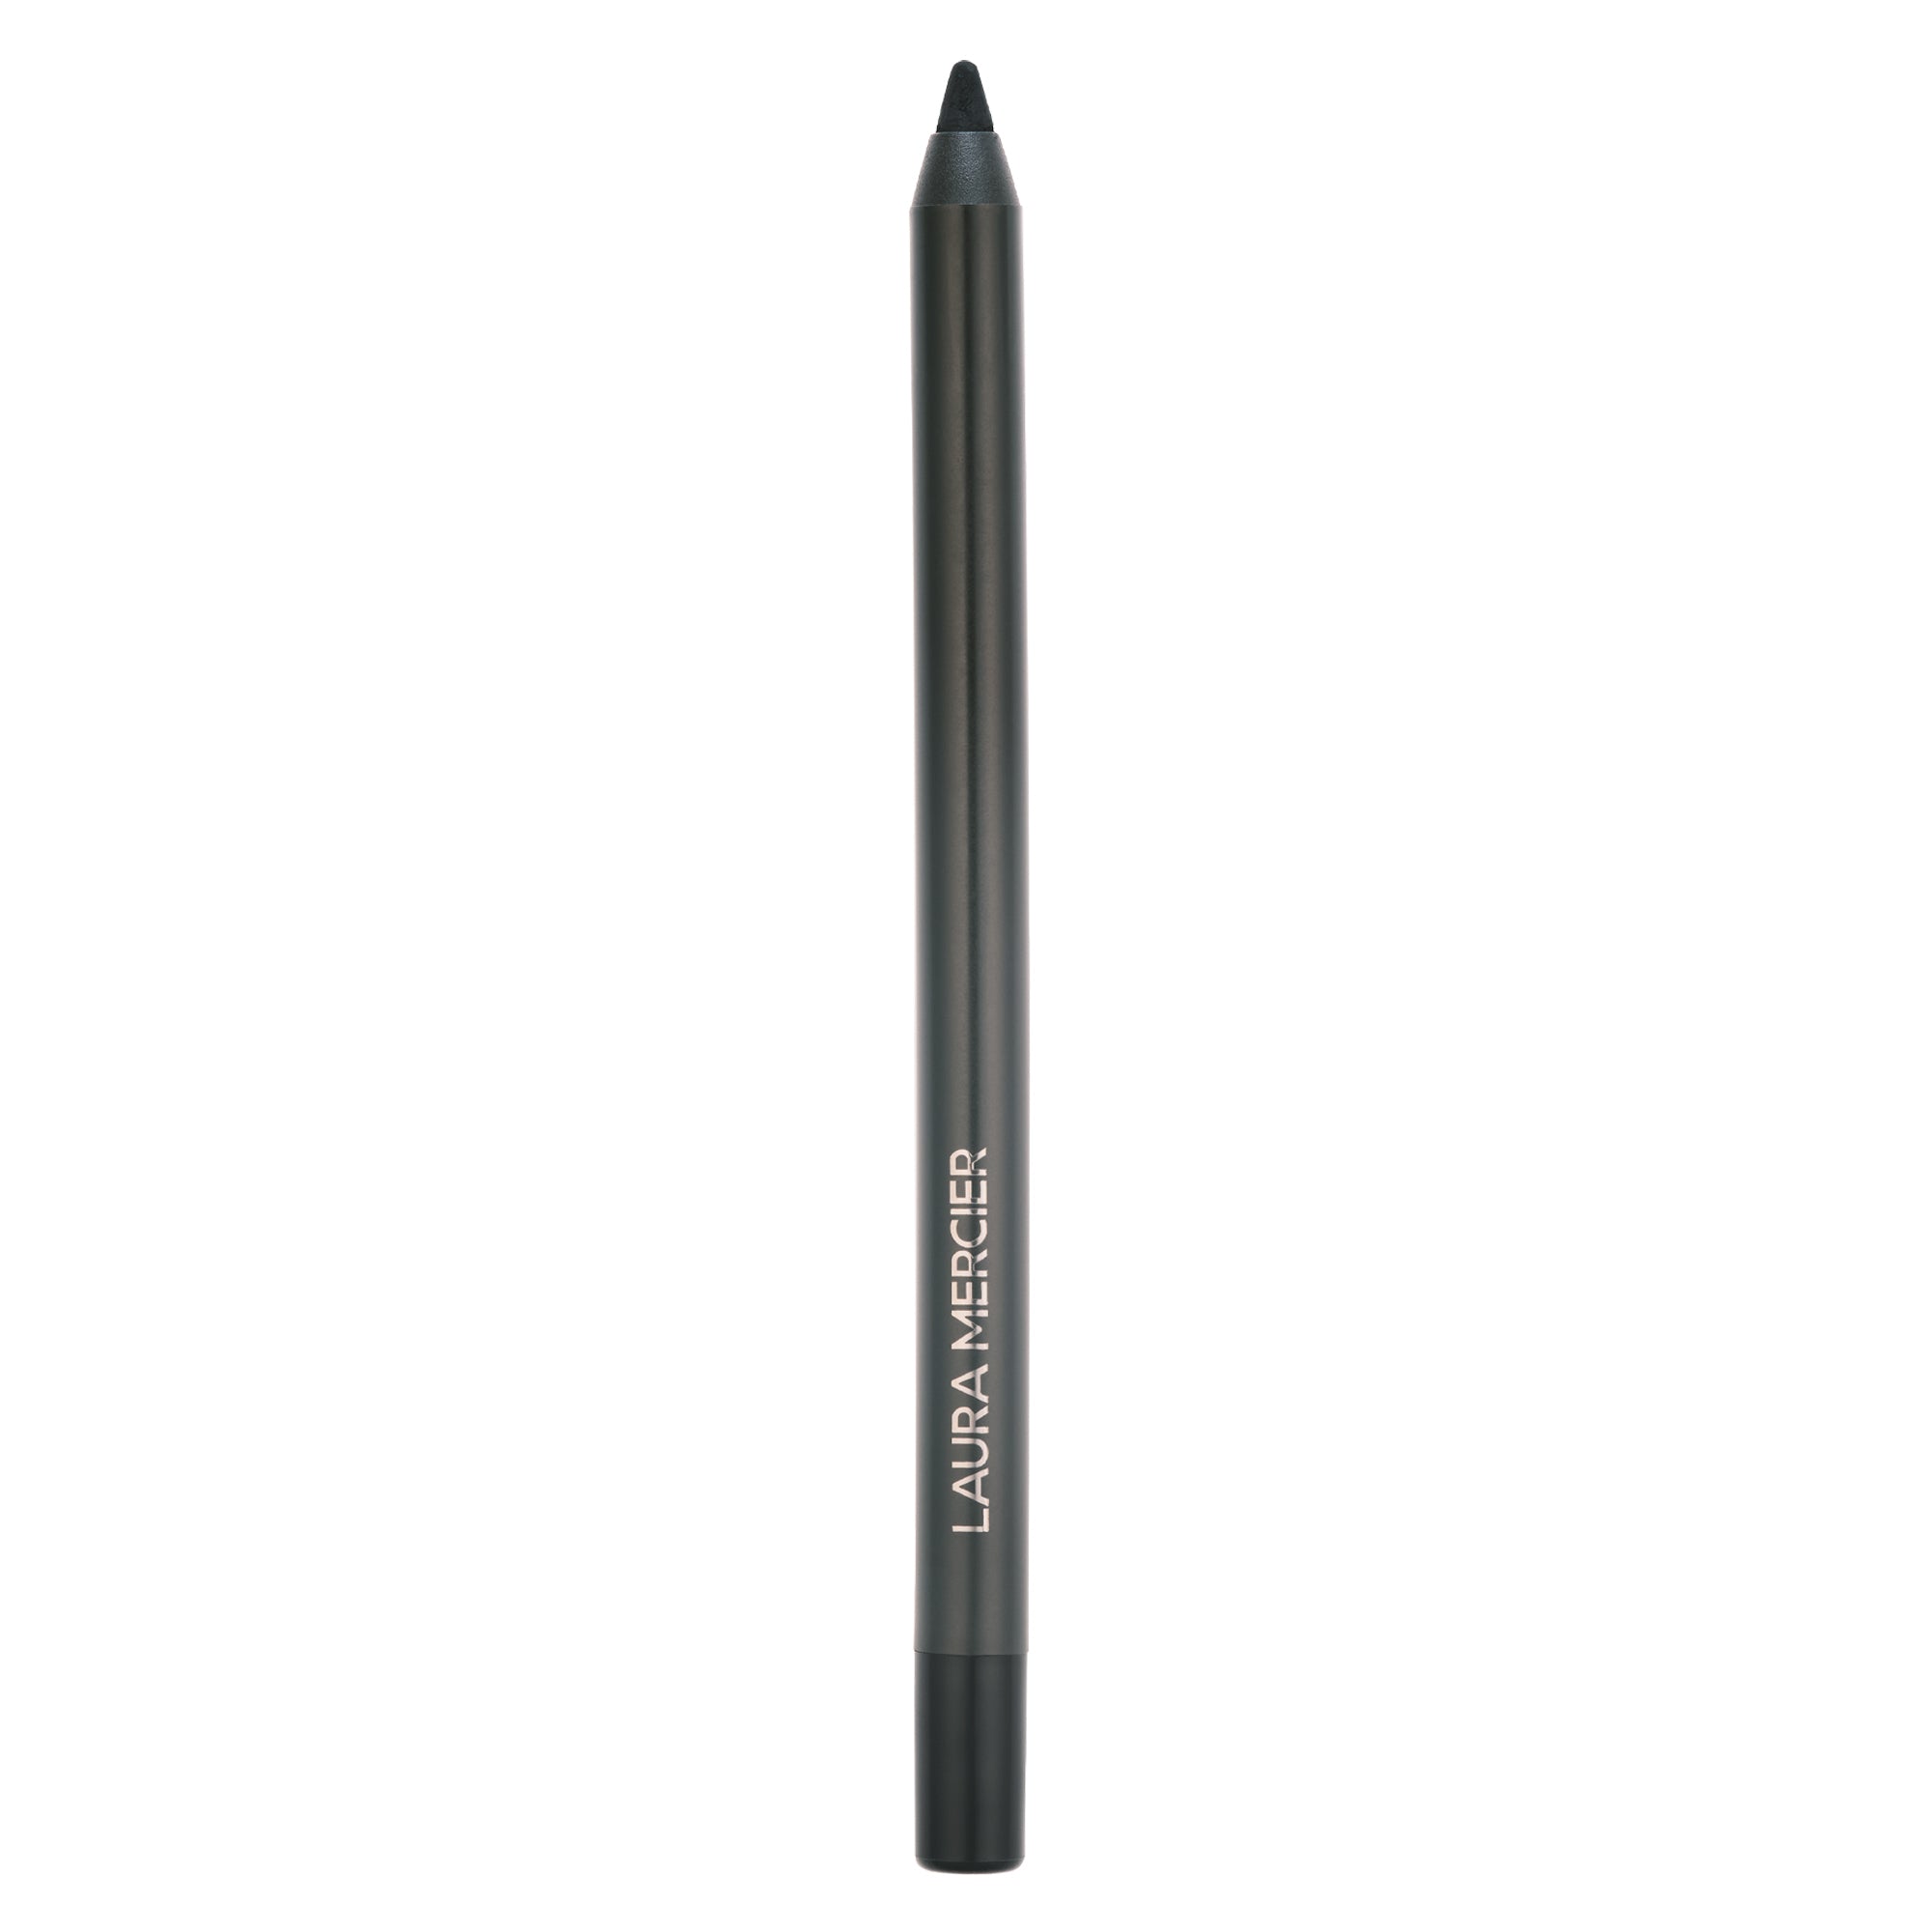 Creamy White Eyeliner the MOST Opaque White Eyeliner on the Market